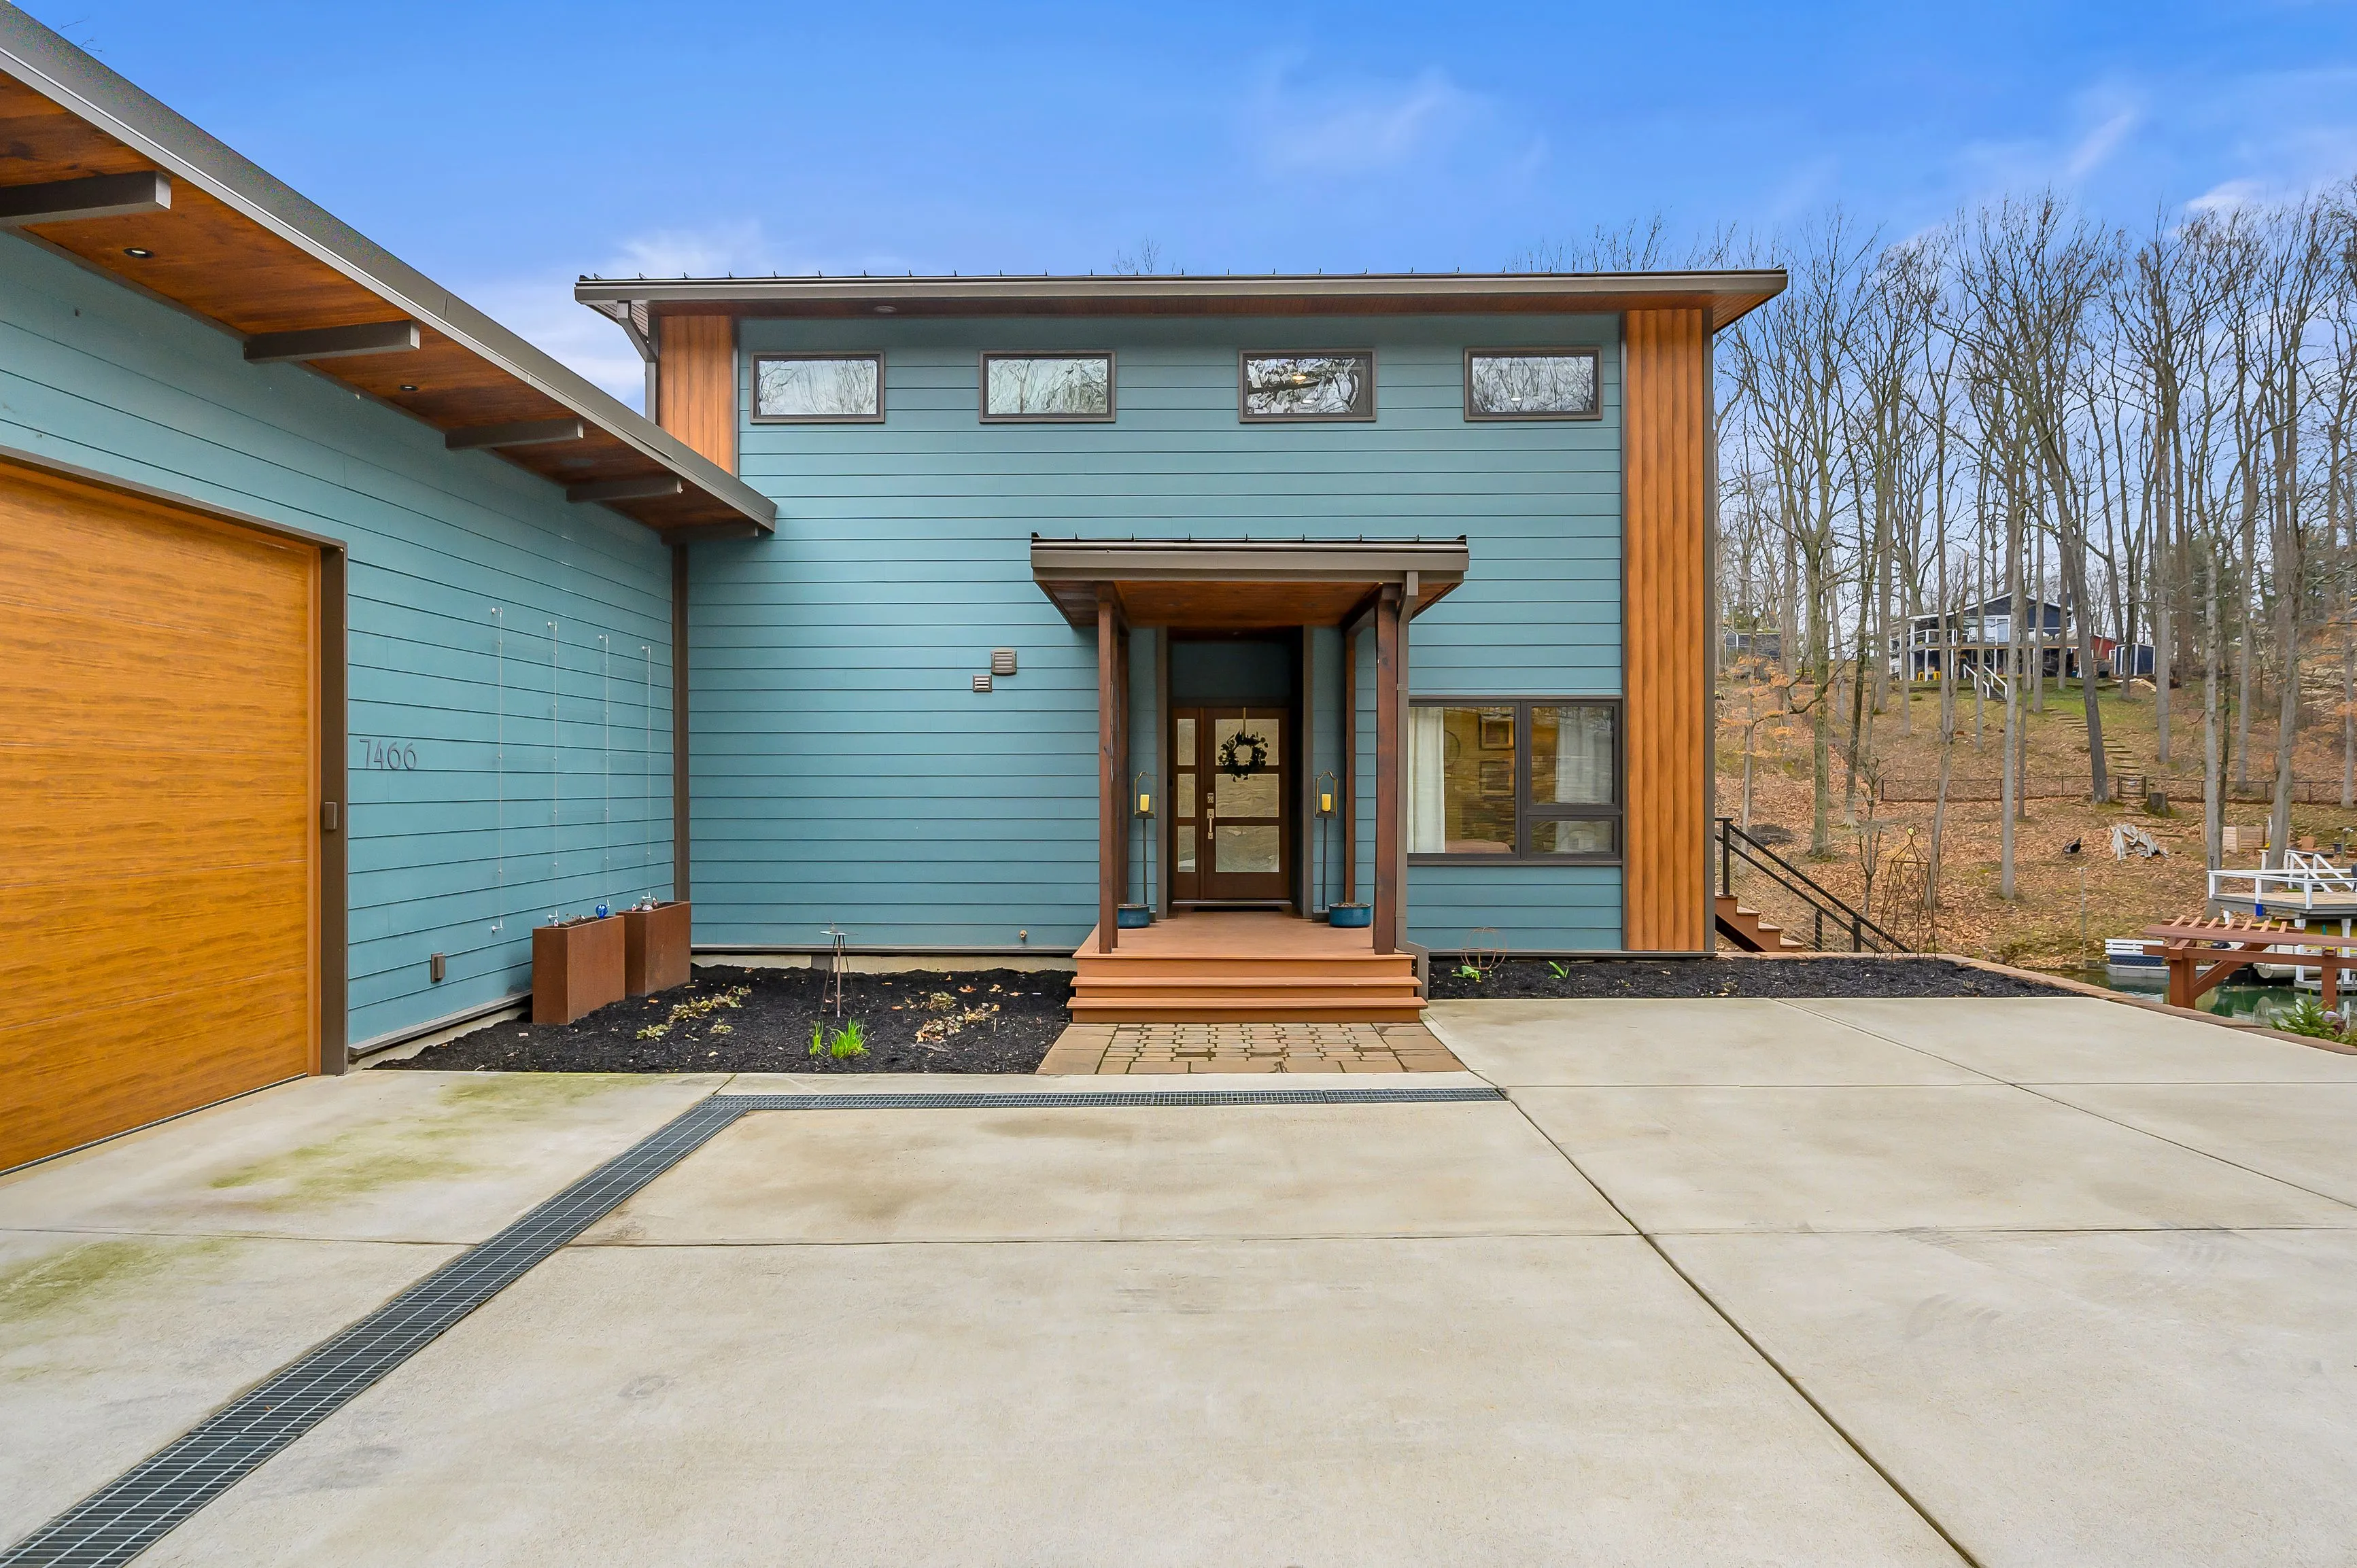 Modern two-story house with blue siding, wooden accents, and a concrete driveway.